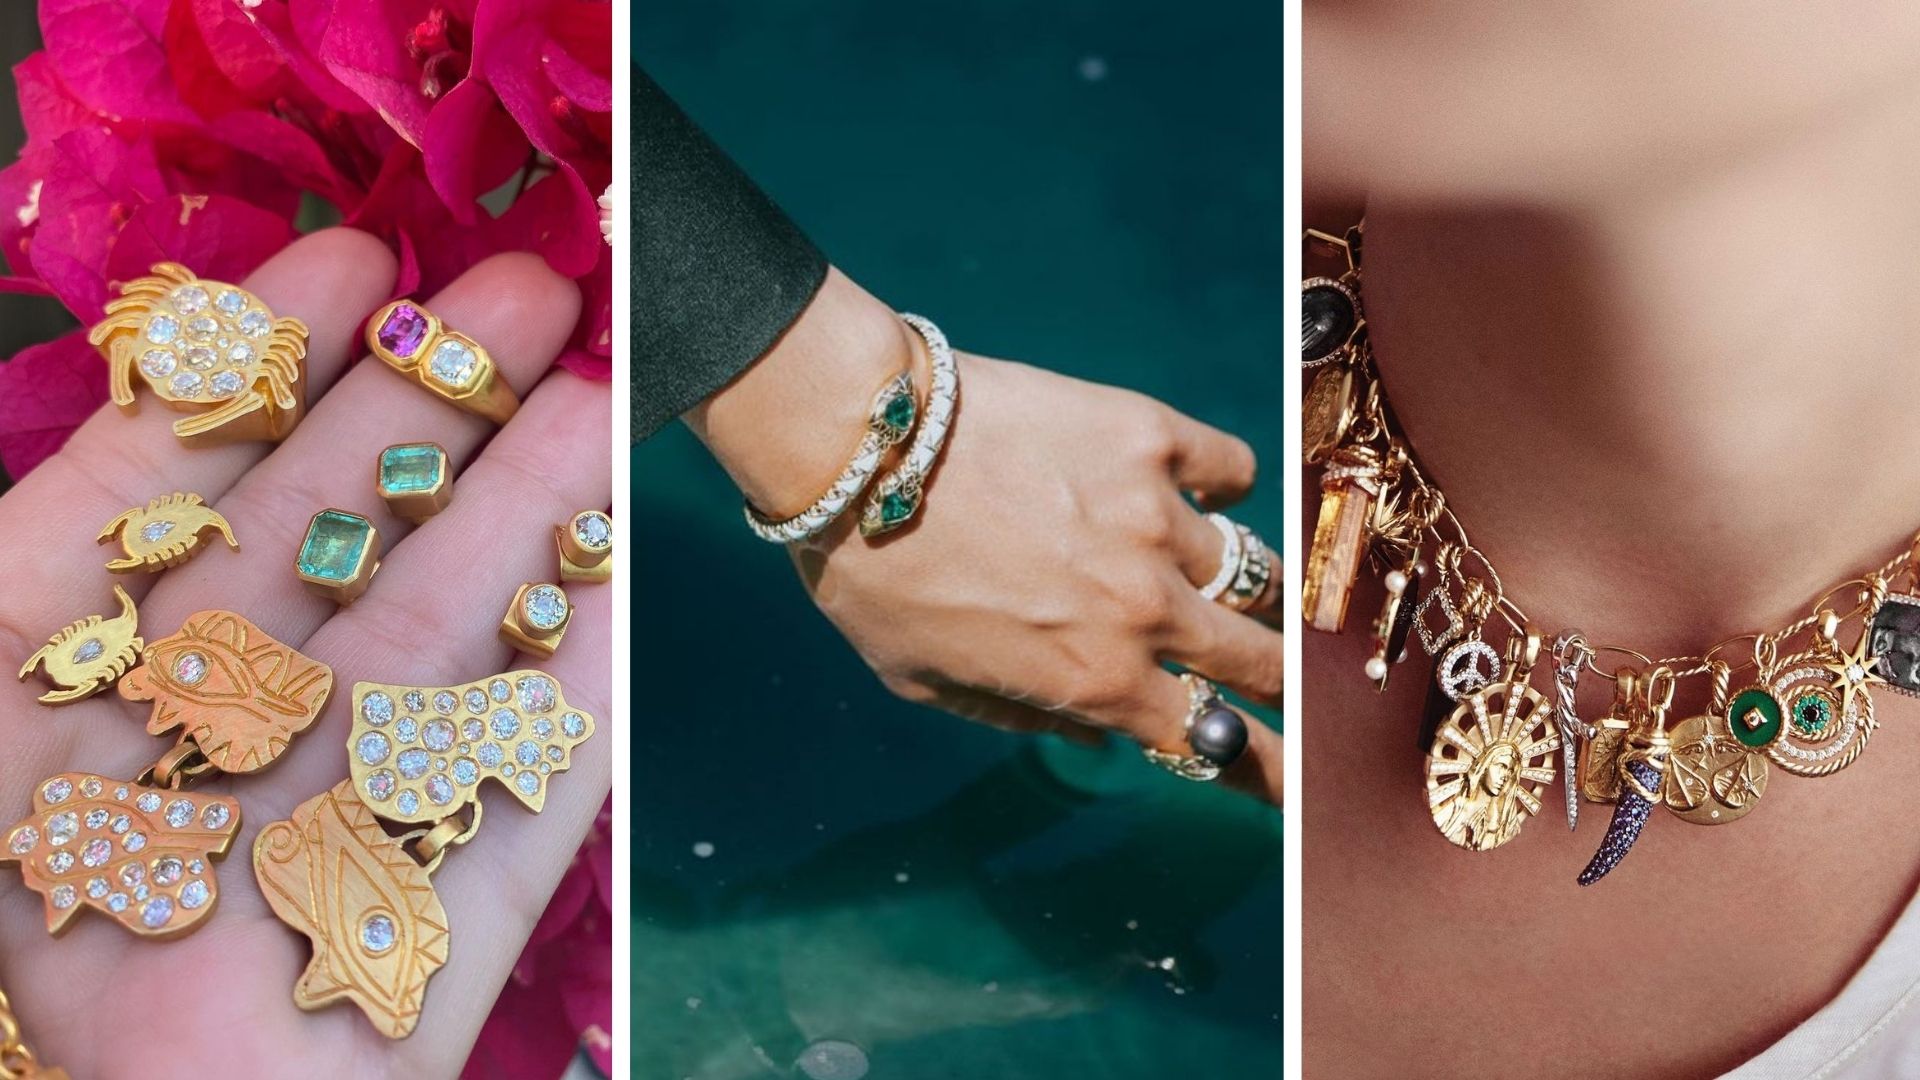 How the most iconic jewellery brands reinvent signature pieces